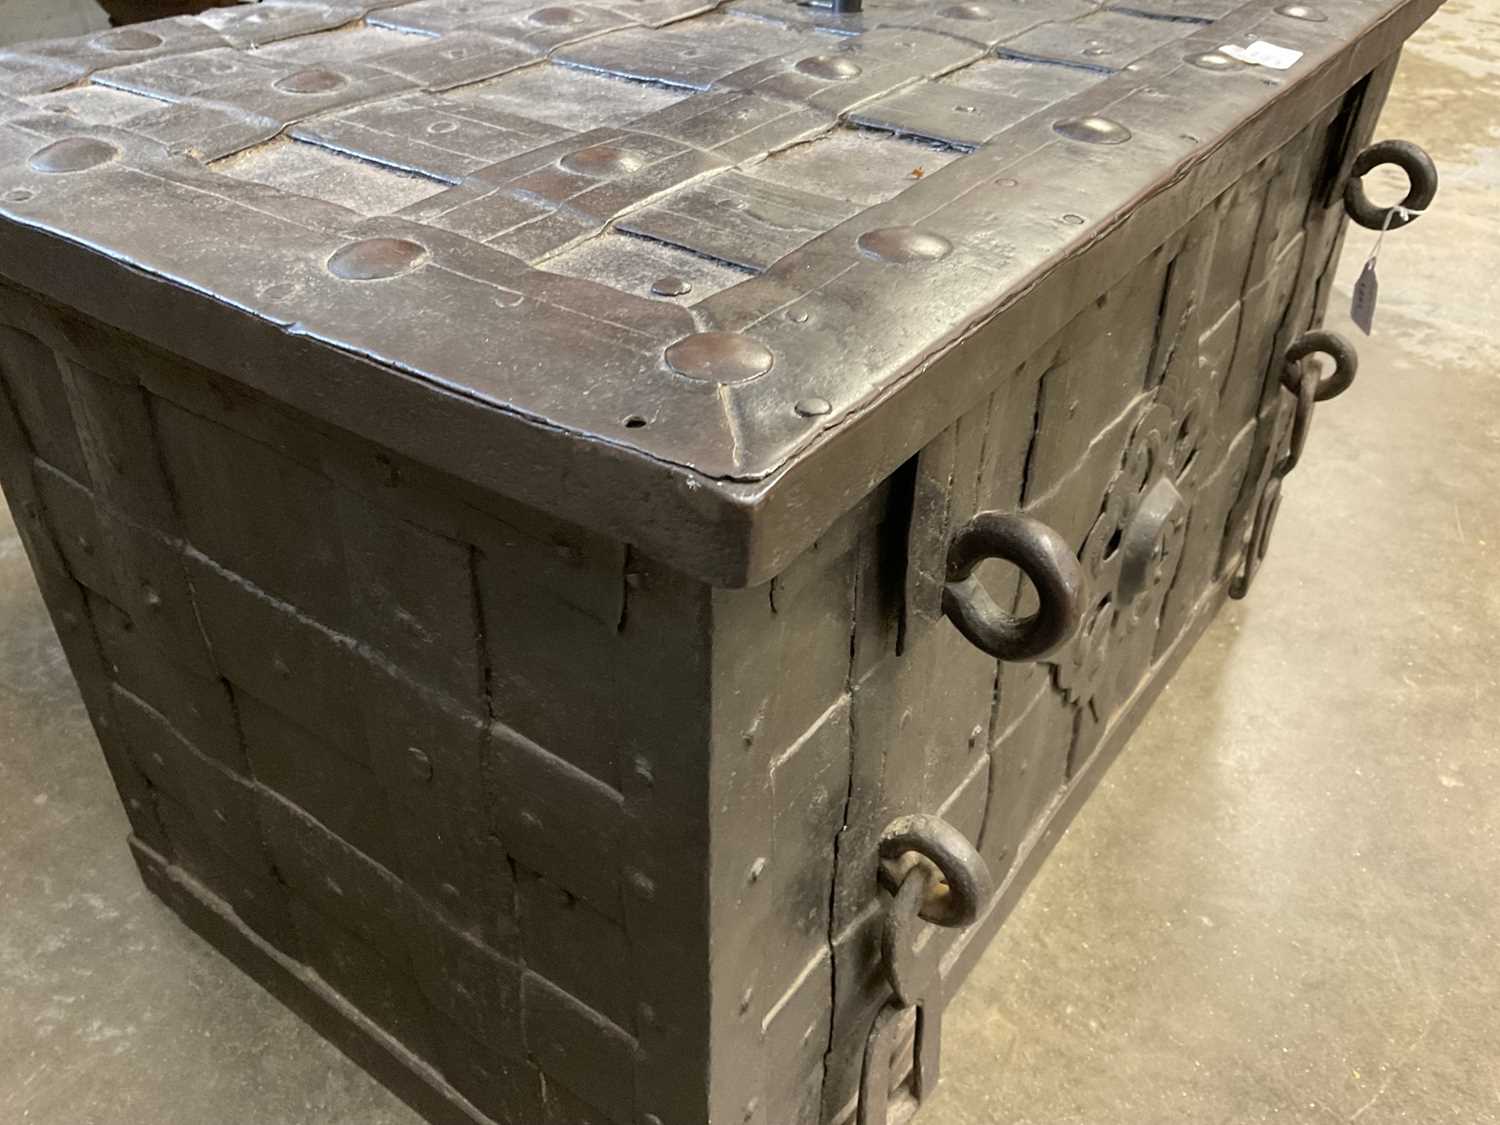 17th century German iron Armada chest with intricate locking system, key marked S. Morden - Image 12 of 23